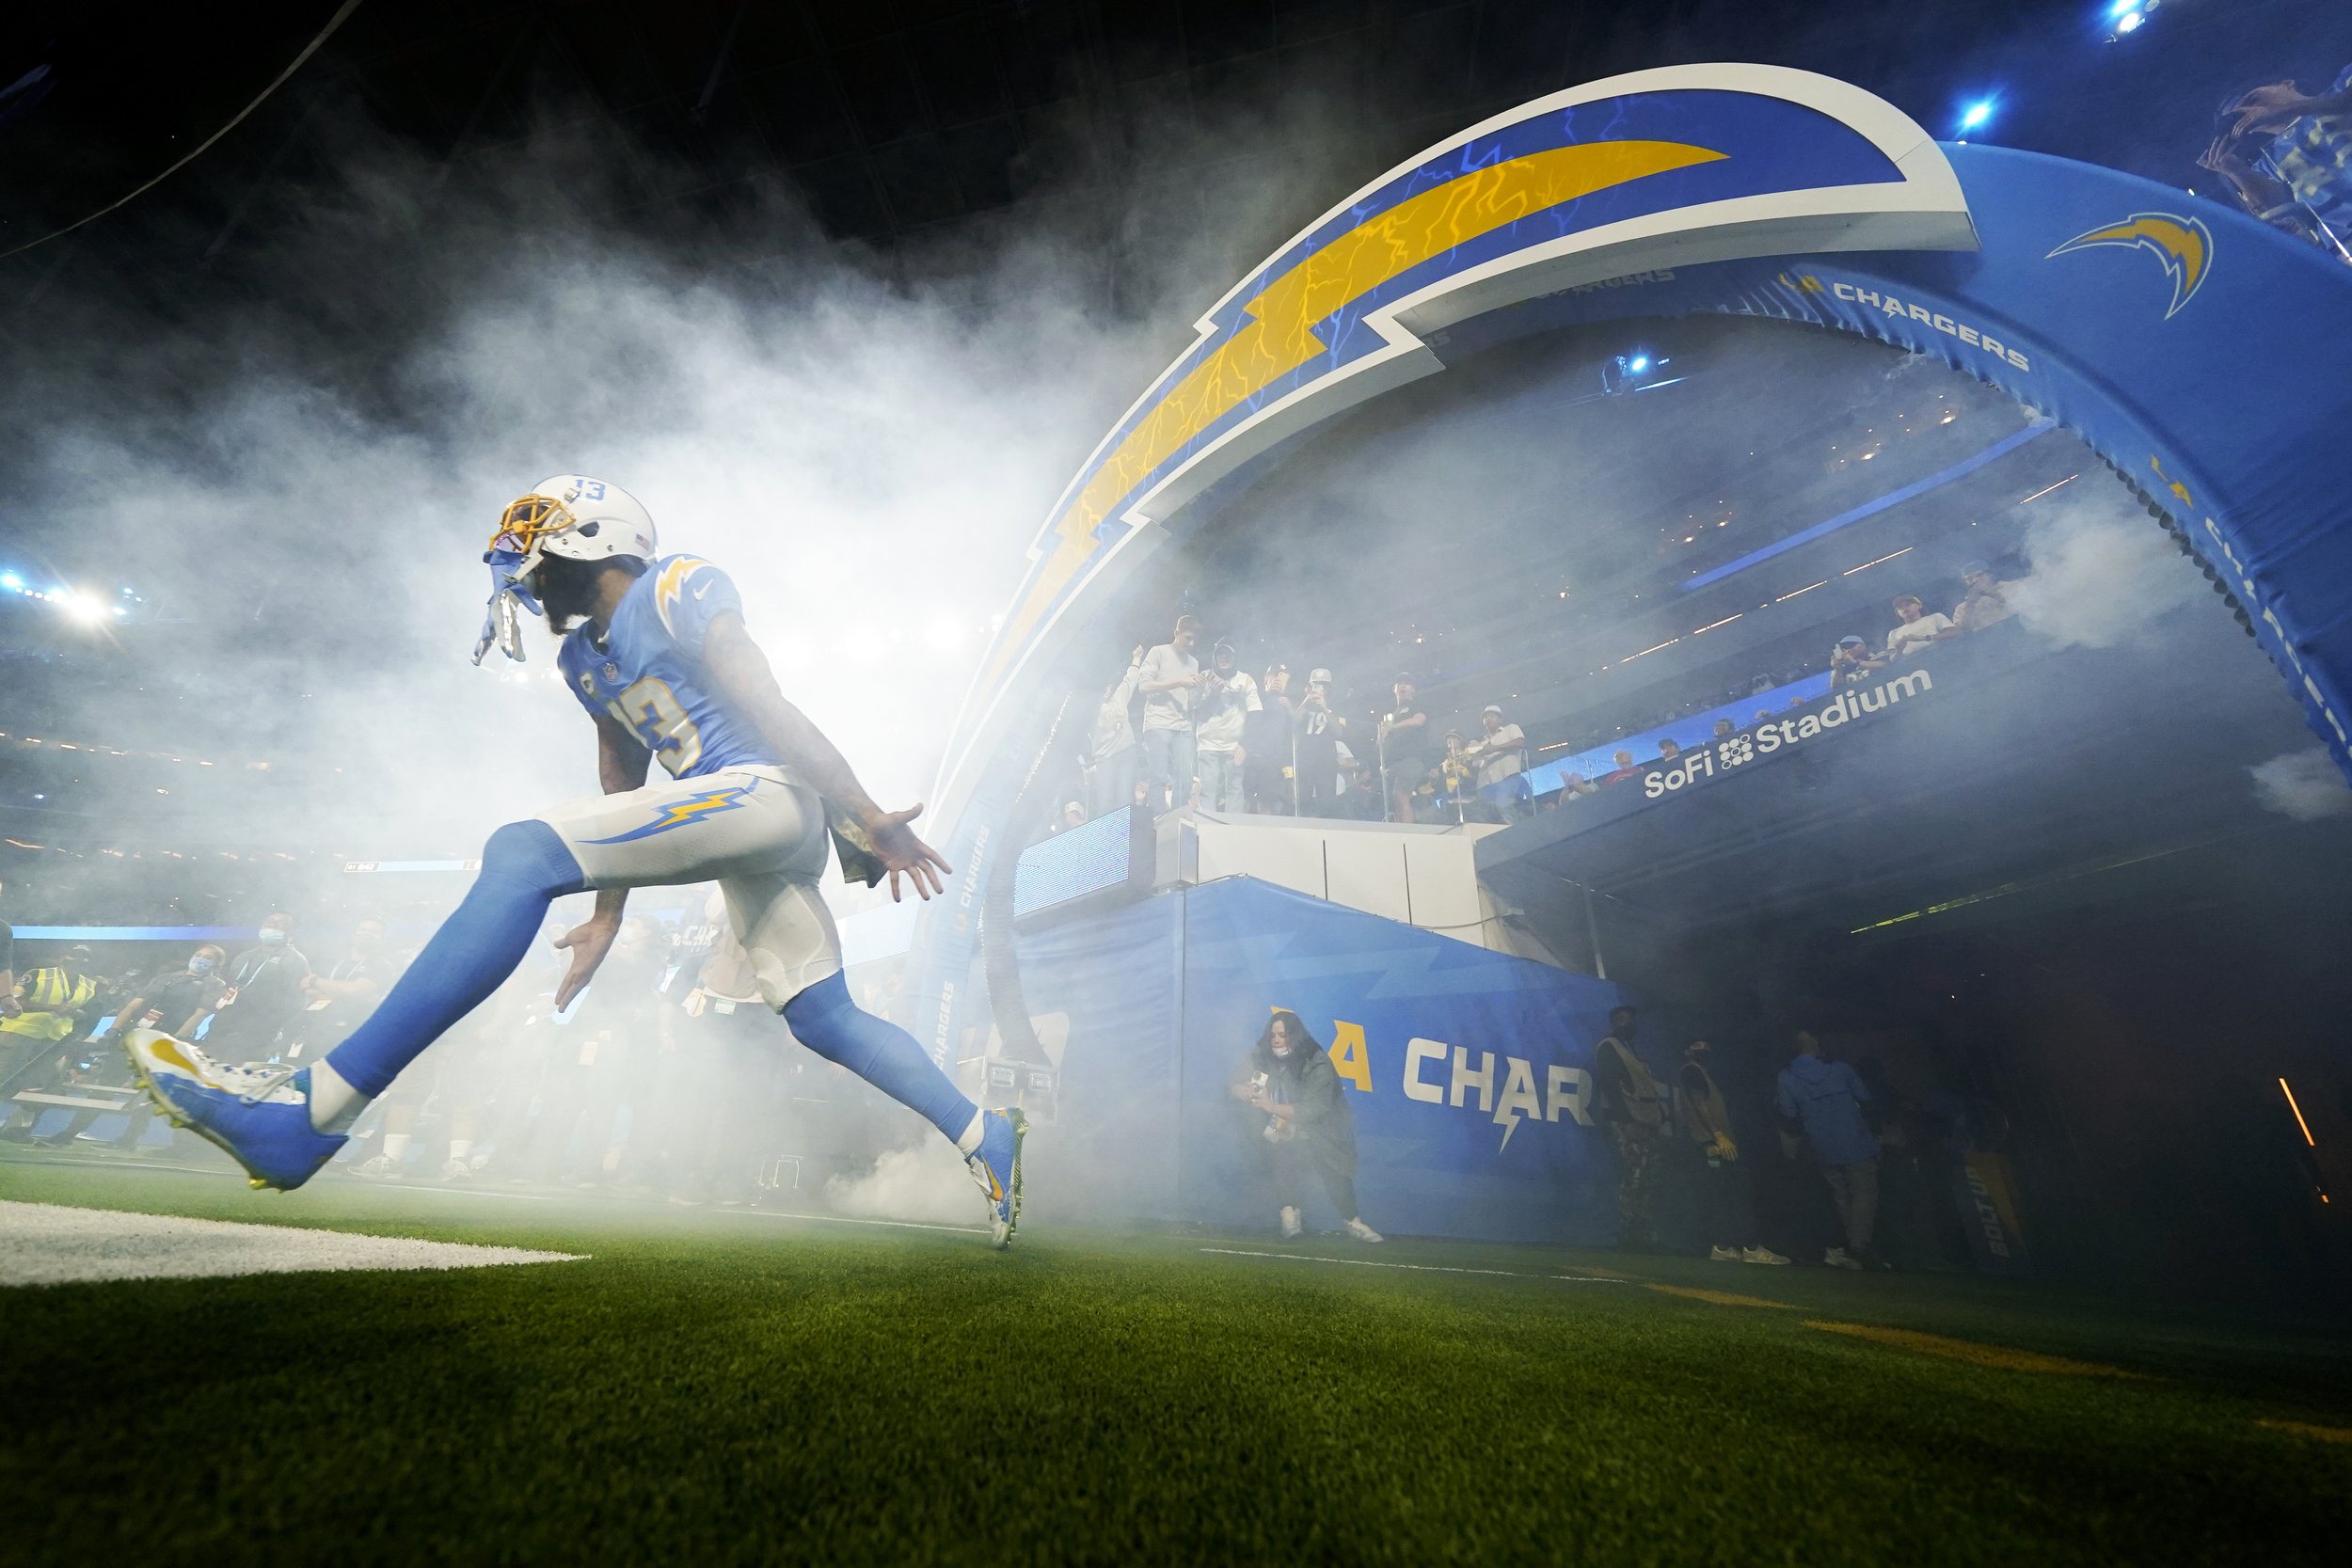  Los Angeles Chargers wide receiver Keenan Allen runs onto the field before an NFL football game against the Pittsburgh Steelers, on Nov. 21, 2021, in Inglewood, Calif. (AP Photo/Ashley Landis) 